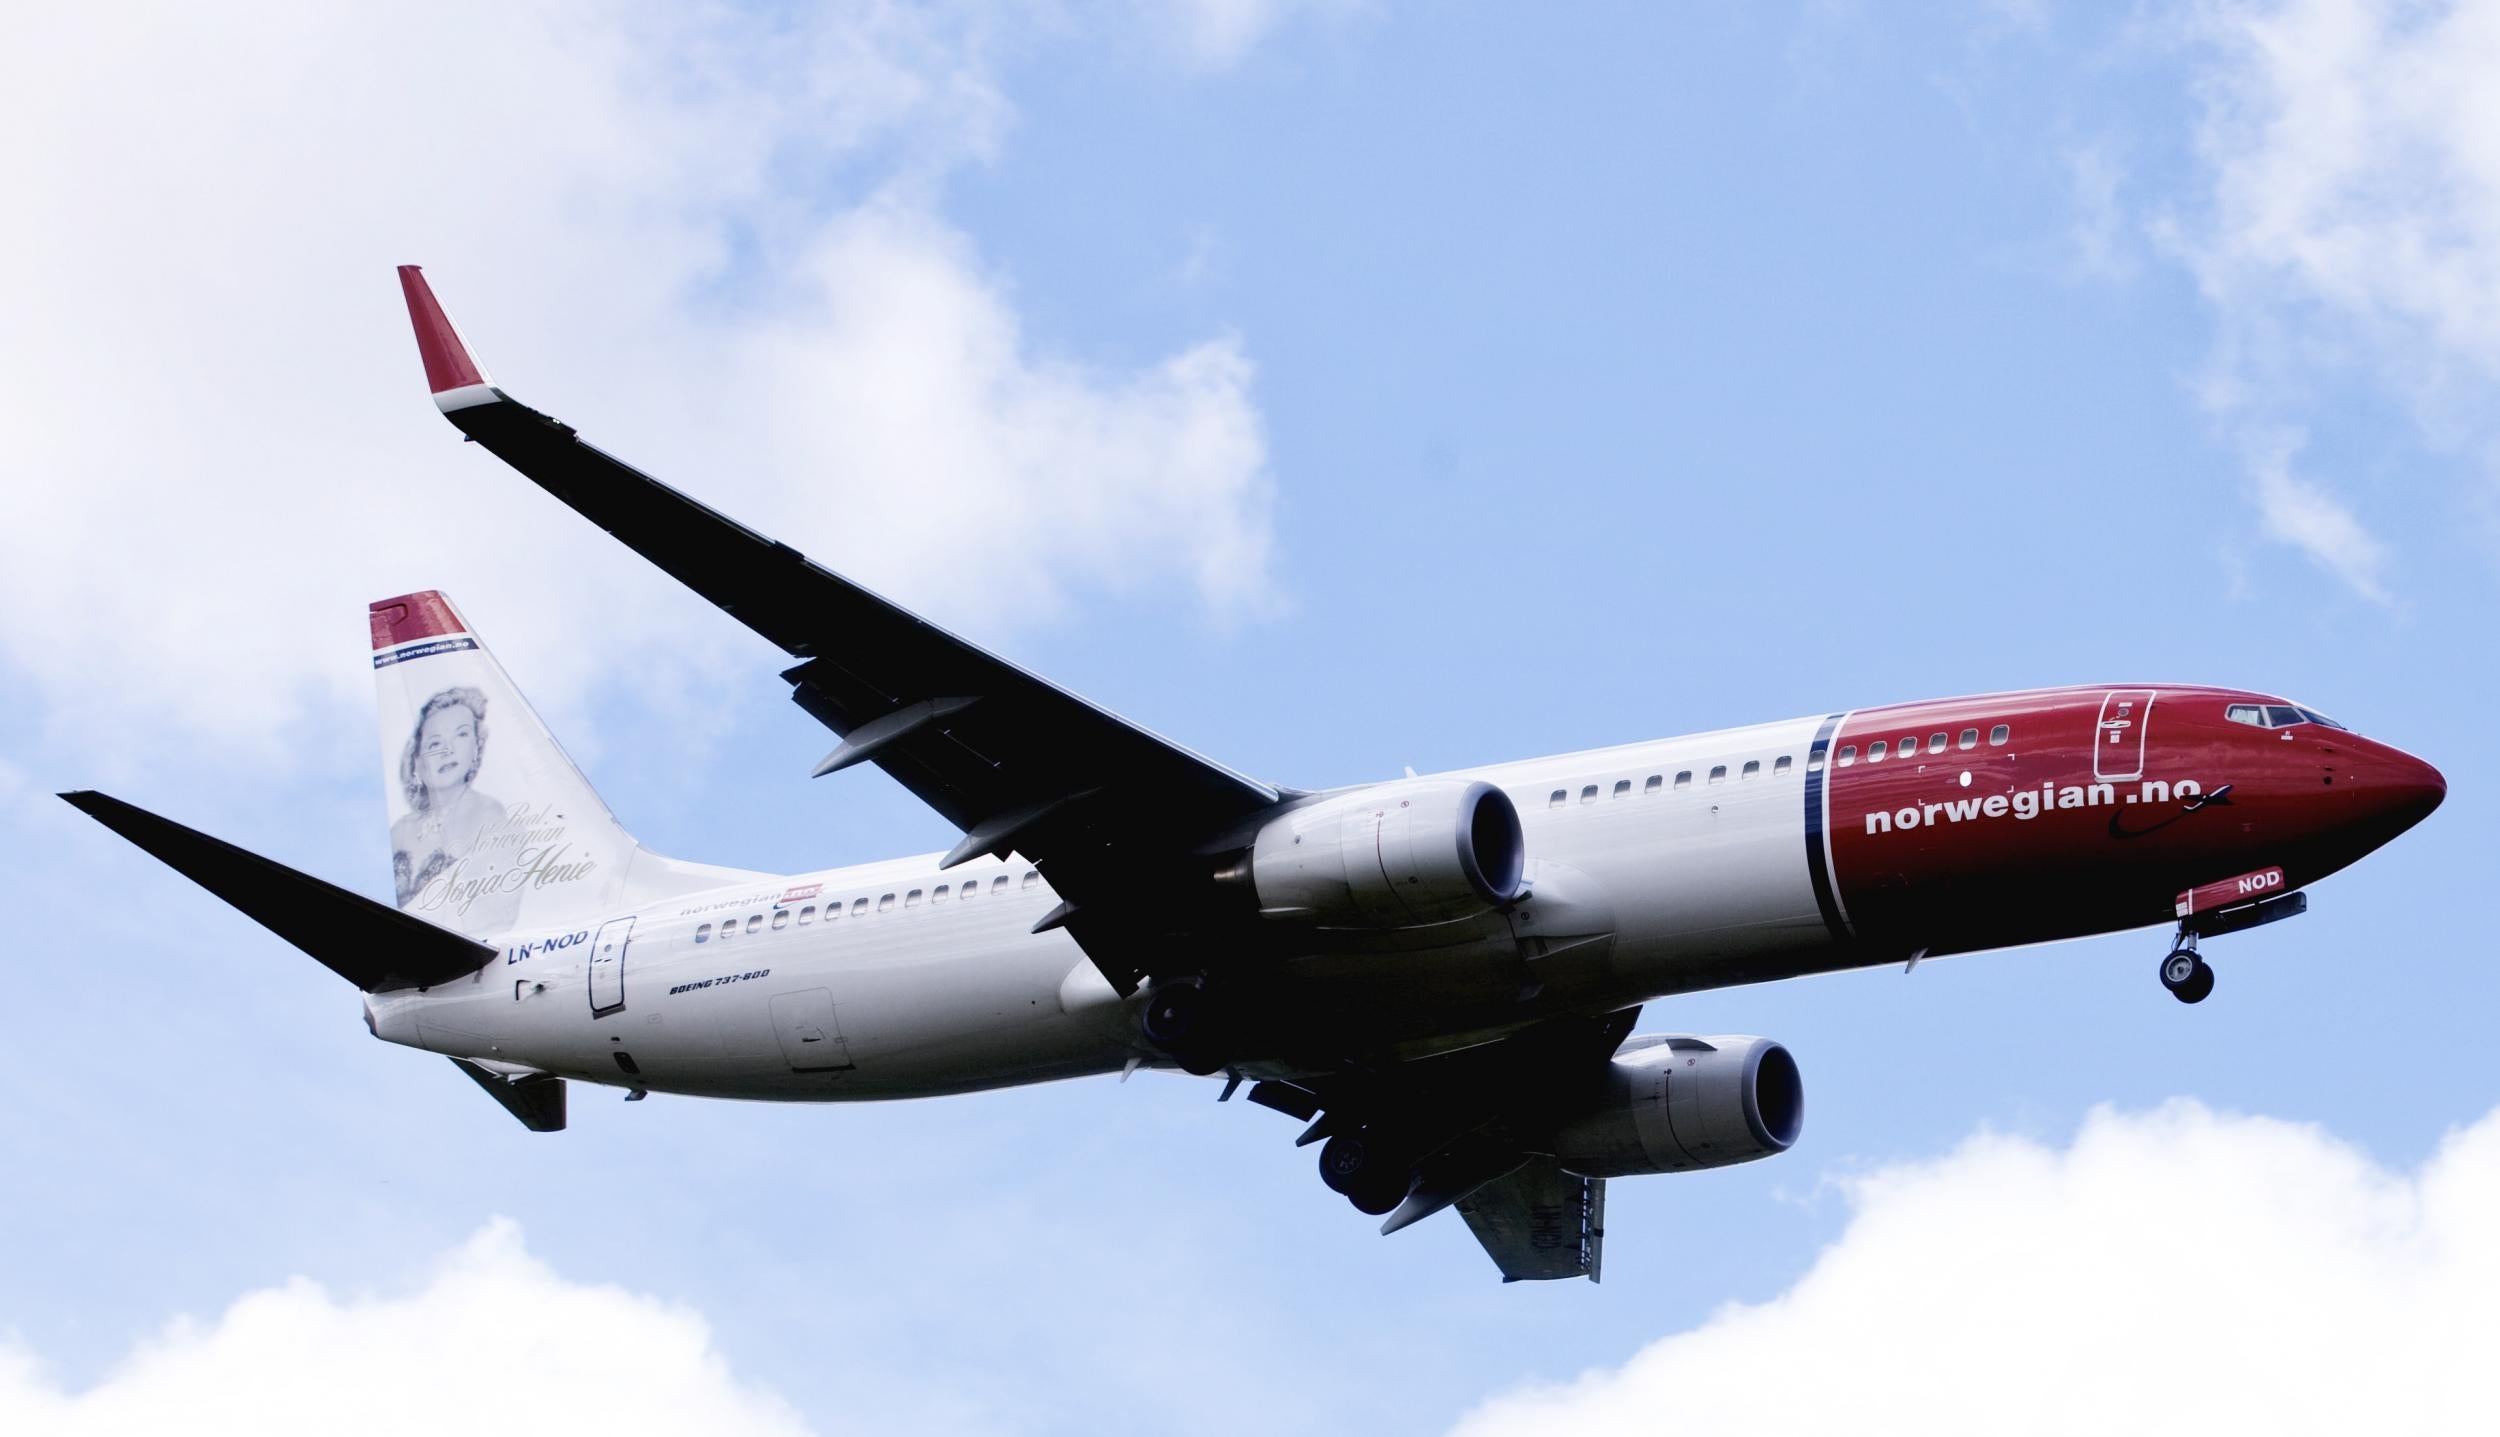 Norwegian Air is disrupting long-haul commercial aviation in the same manner that easyJet and Ryanair did for short-haul